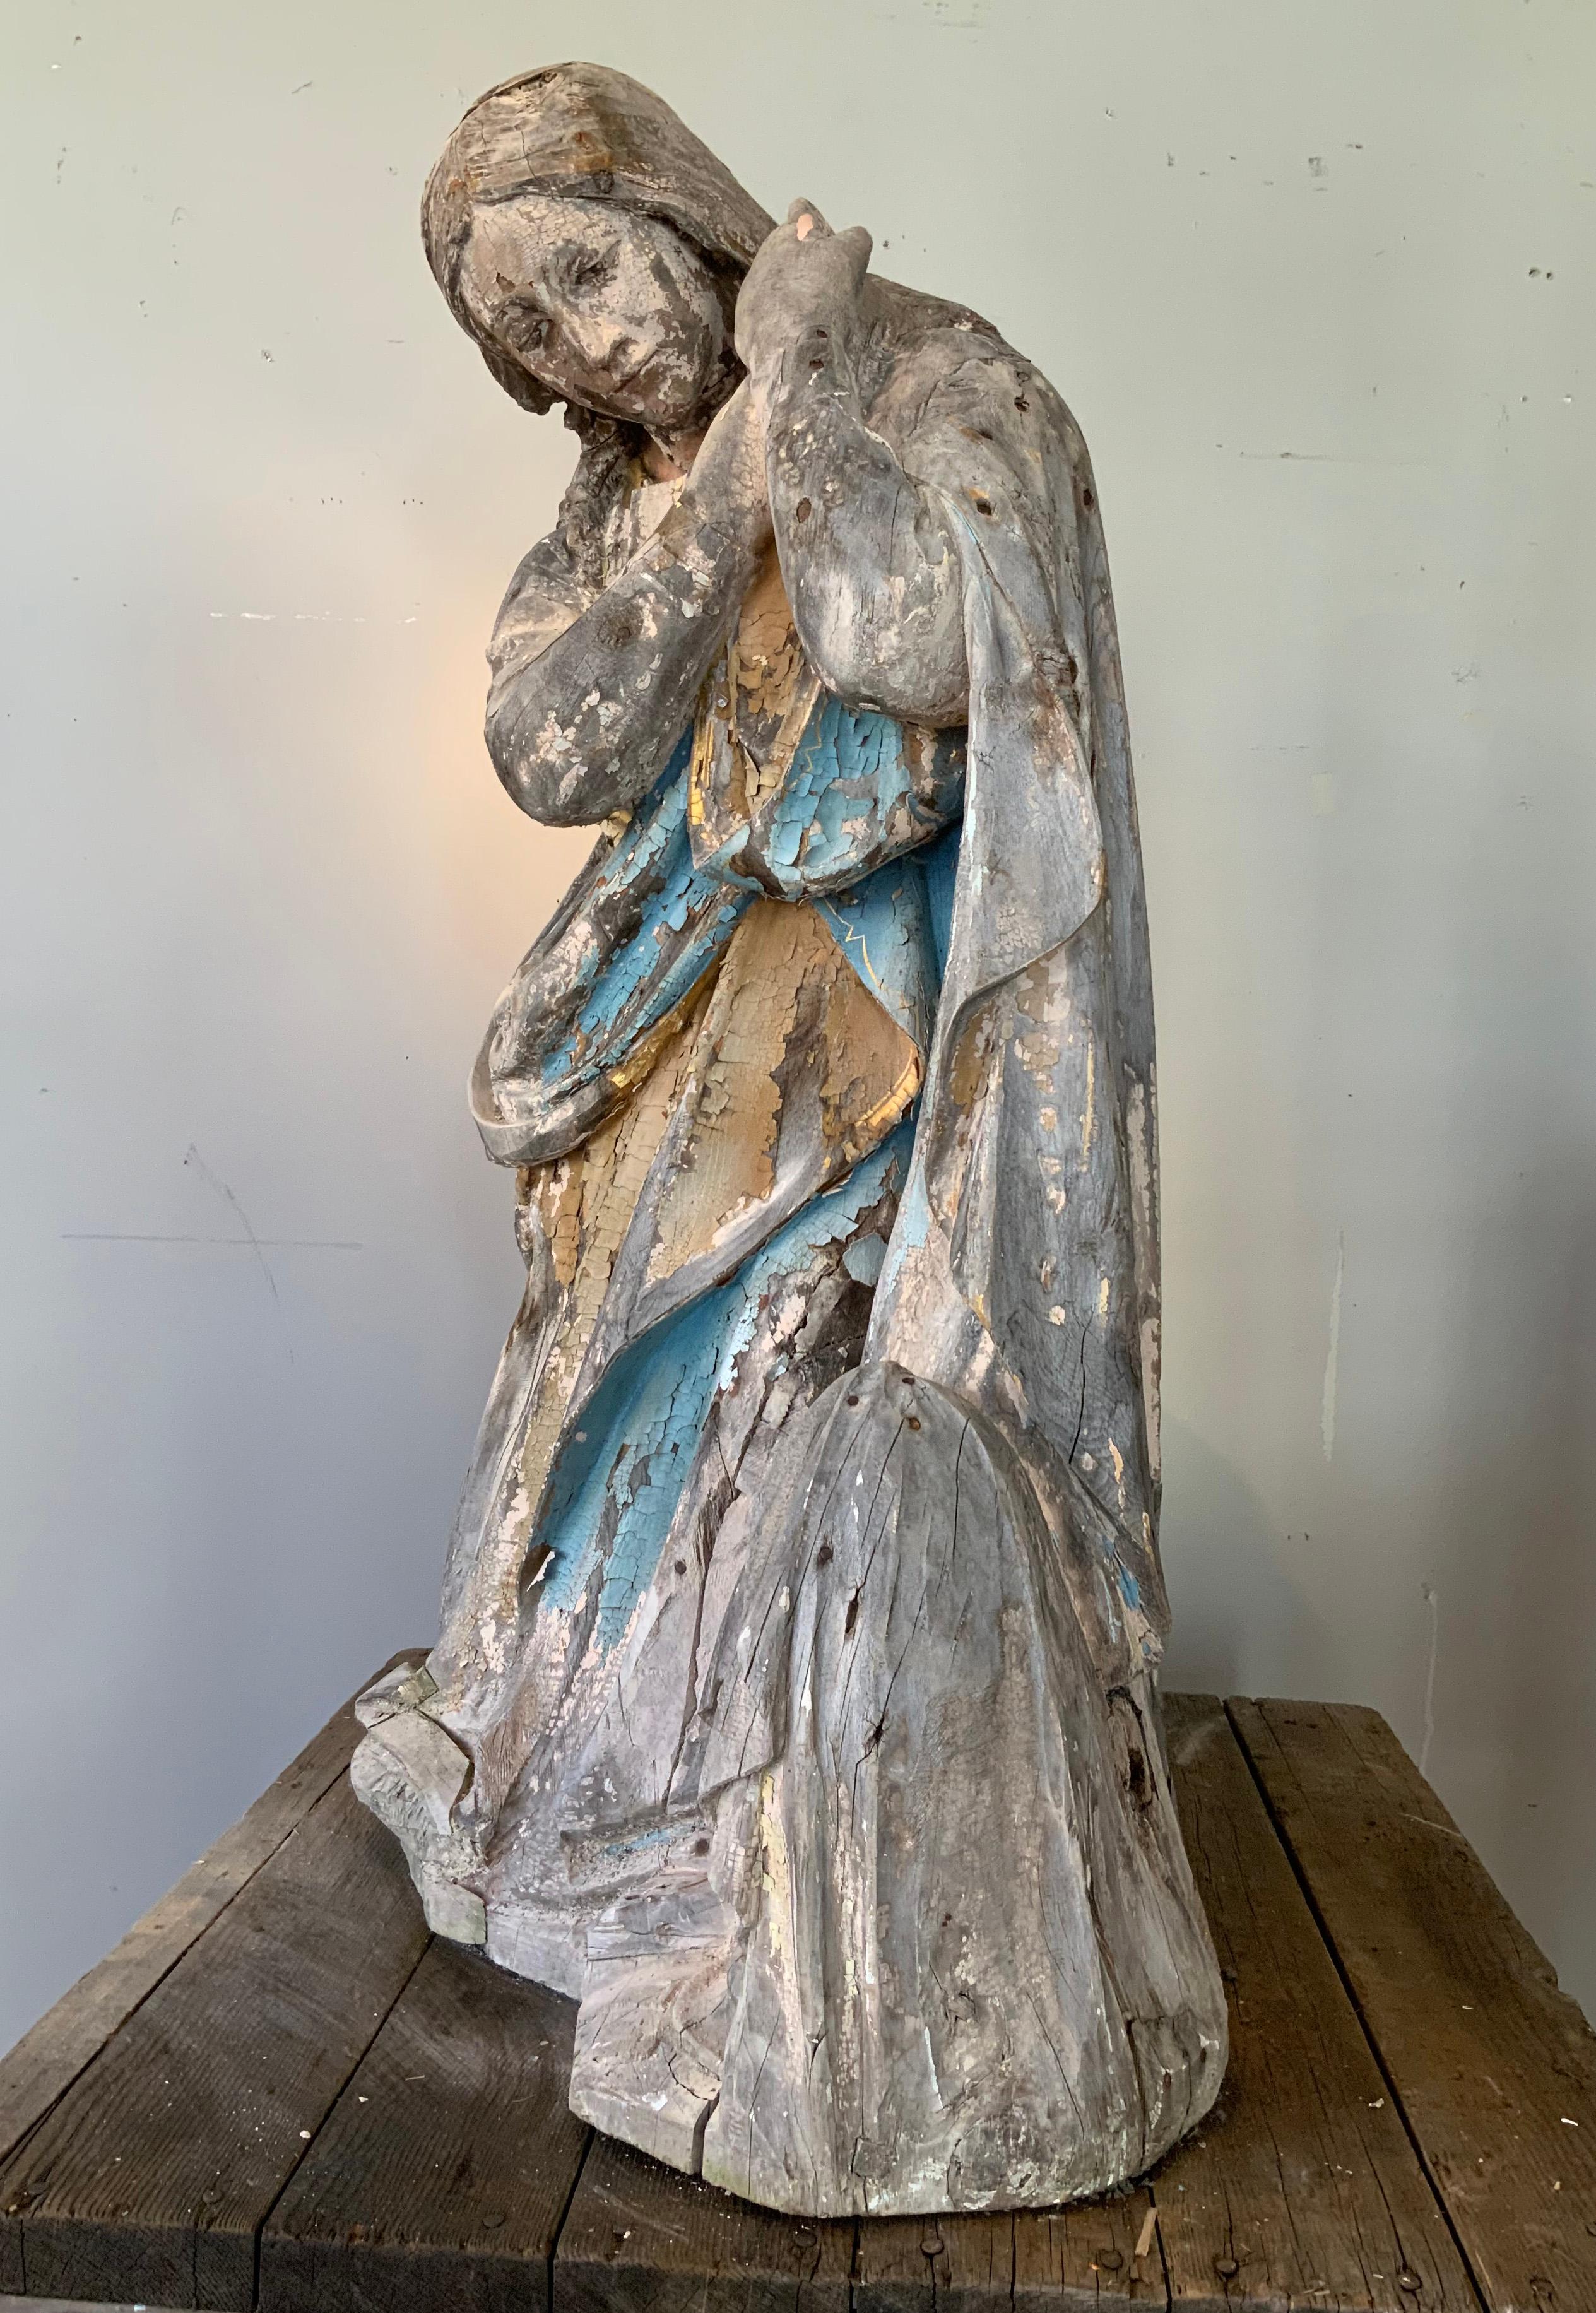 an incredible antique late 19th century carved wood sculpture of a saint figure. the sculpture was originally painted and gilded -- and there are some remnants of the peeling and chipped paint and gilding as well. the wood is split and chipped in